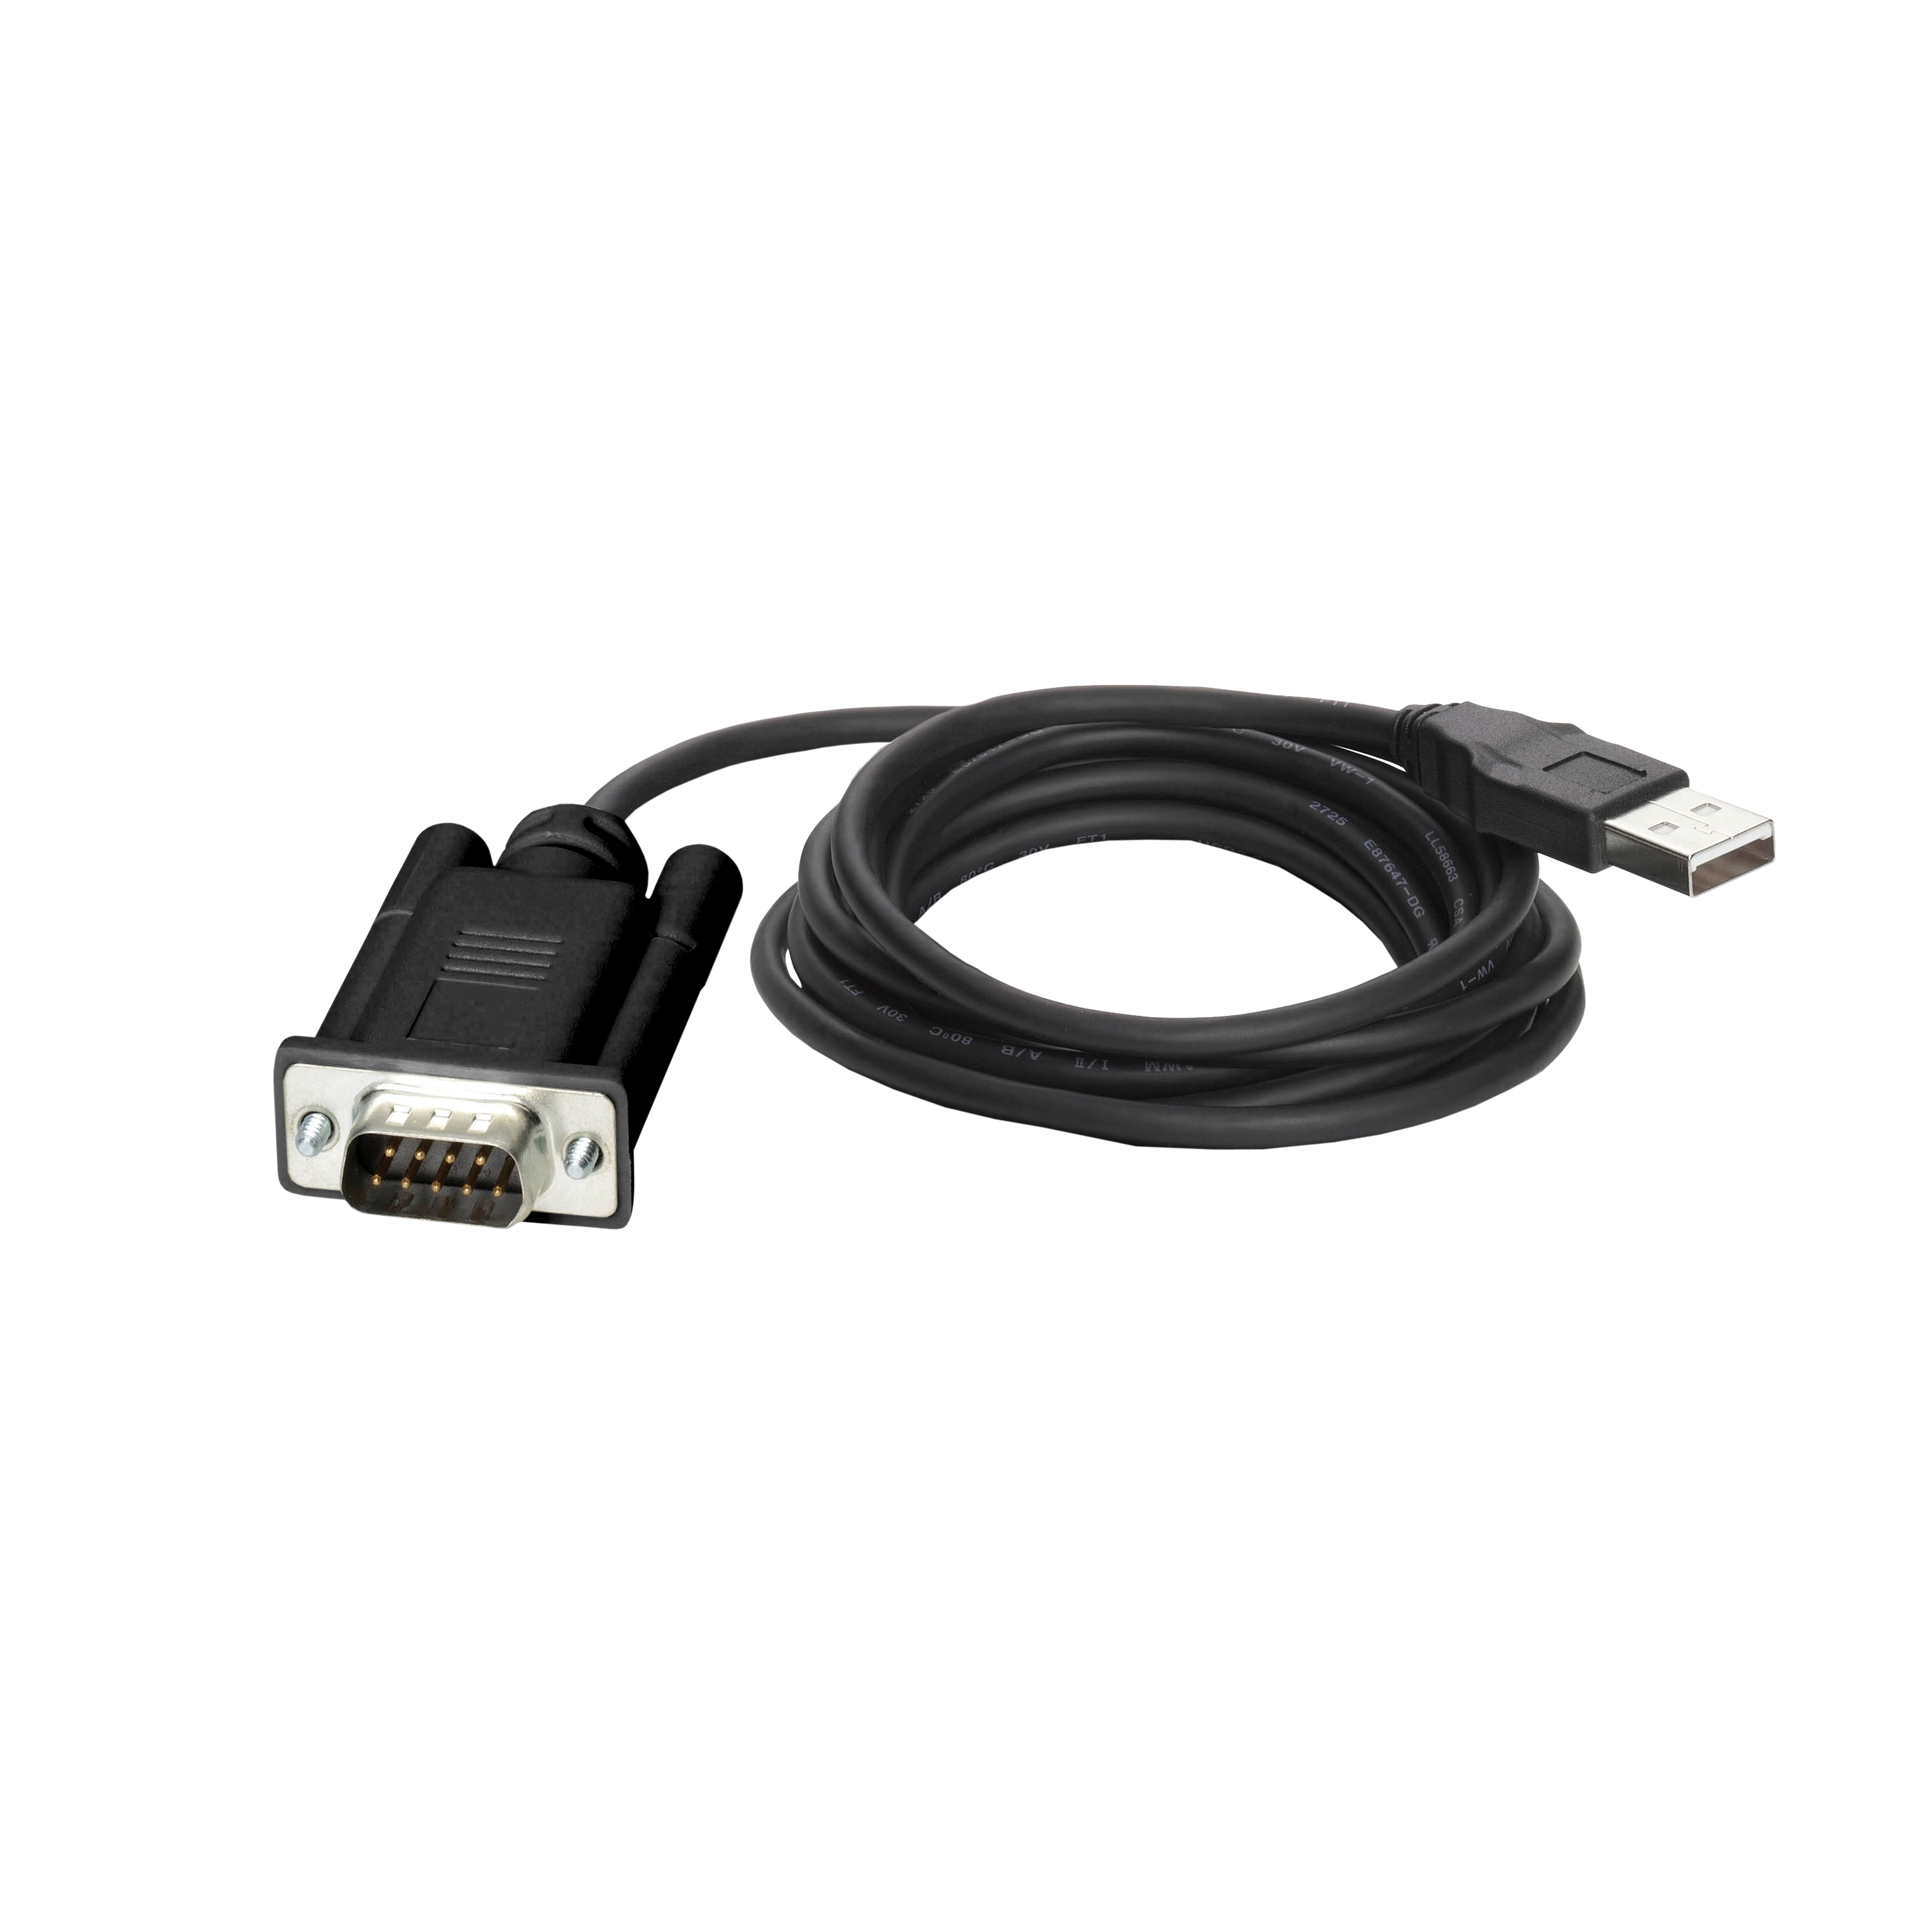 adaptator for PC USB port link - cable length 1.8 m - 1 male connector